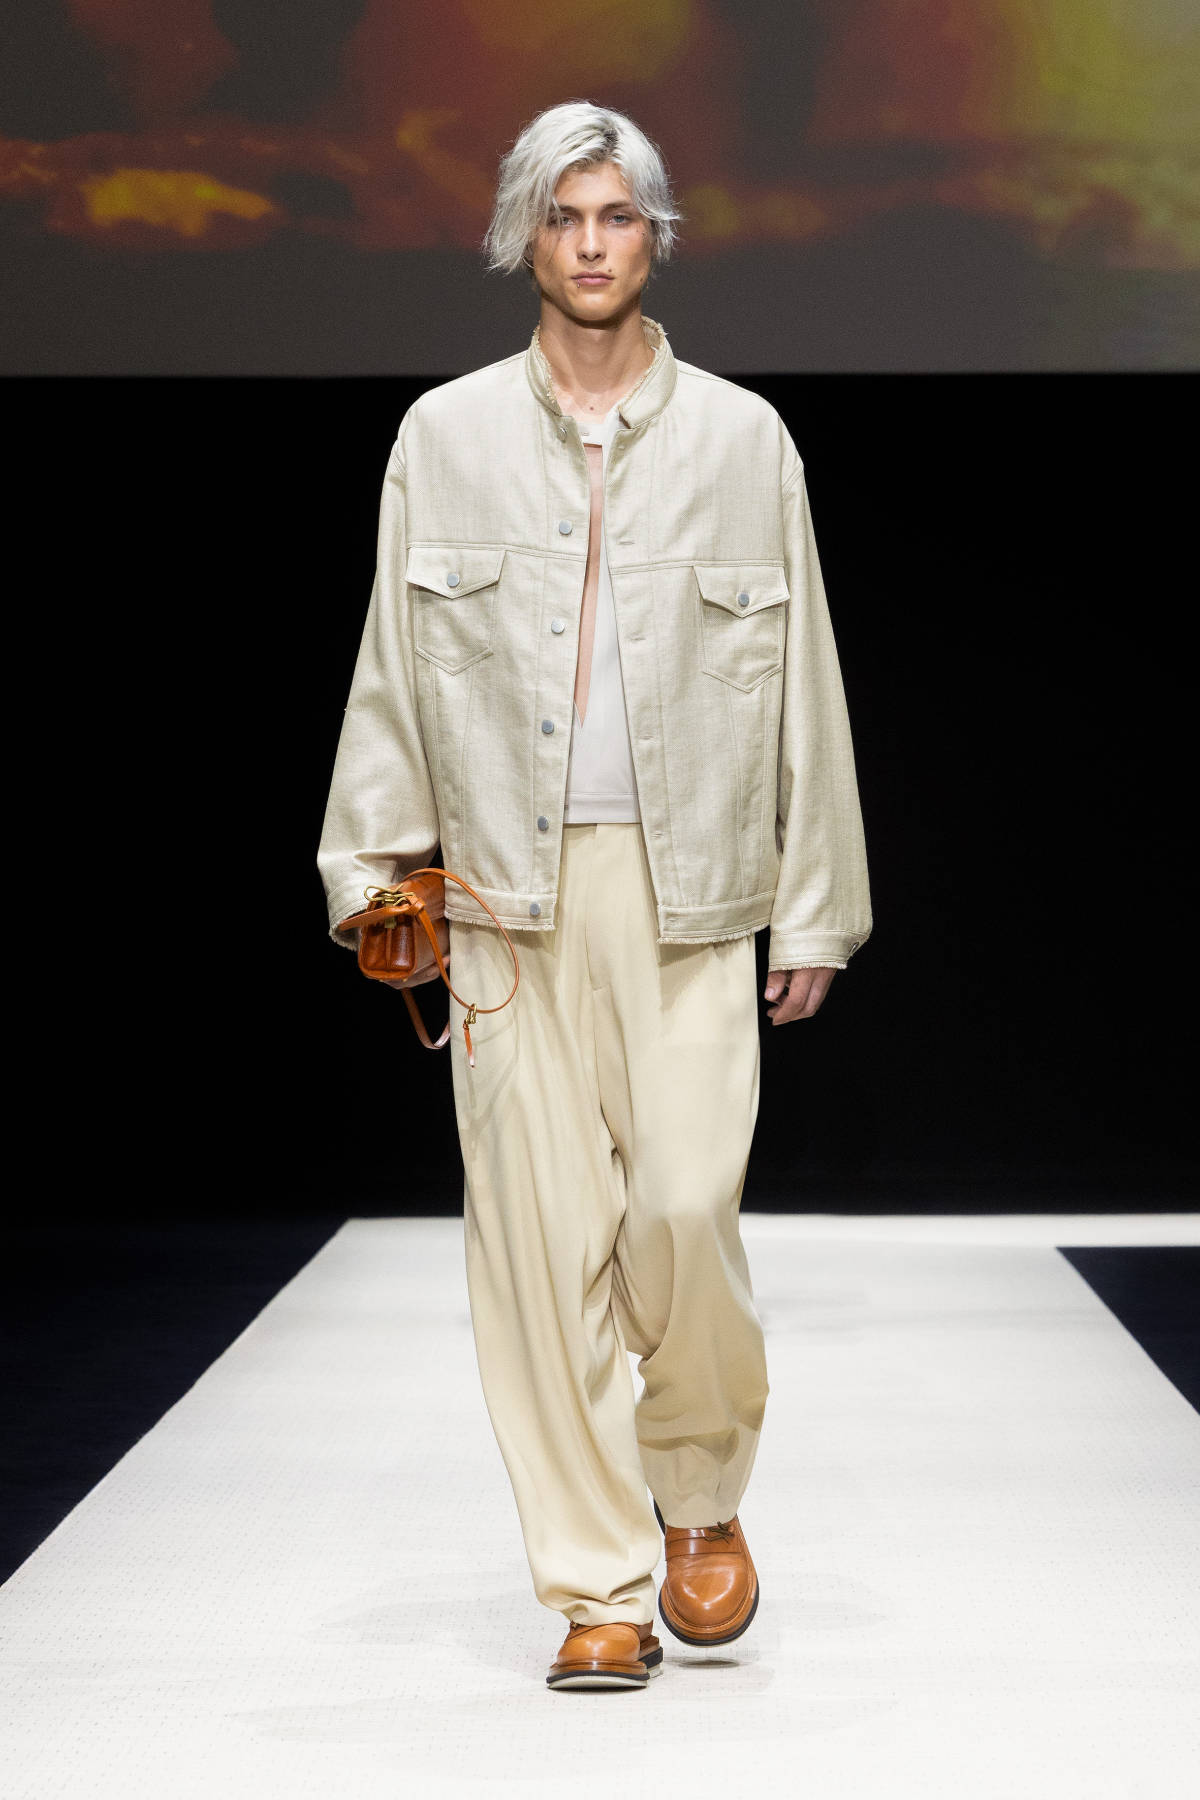 Emporio Armani Presents Its New Men's Spring Summer 2025 Collection